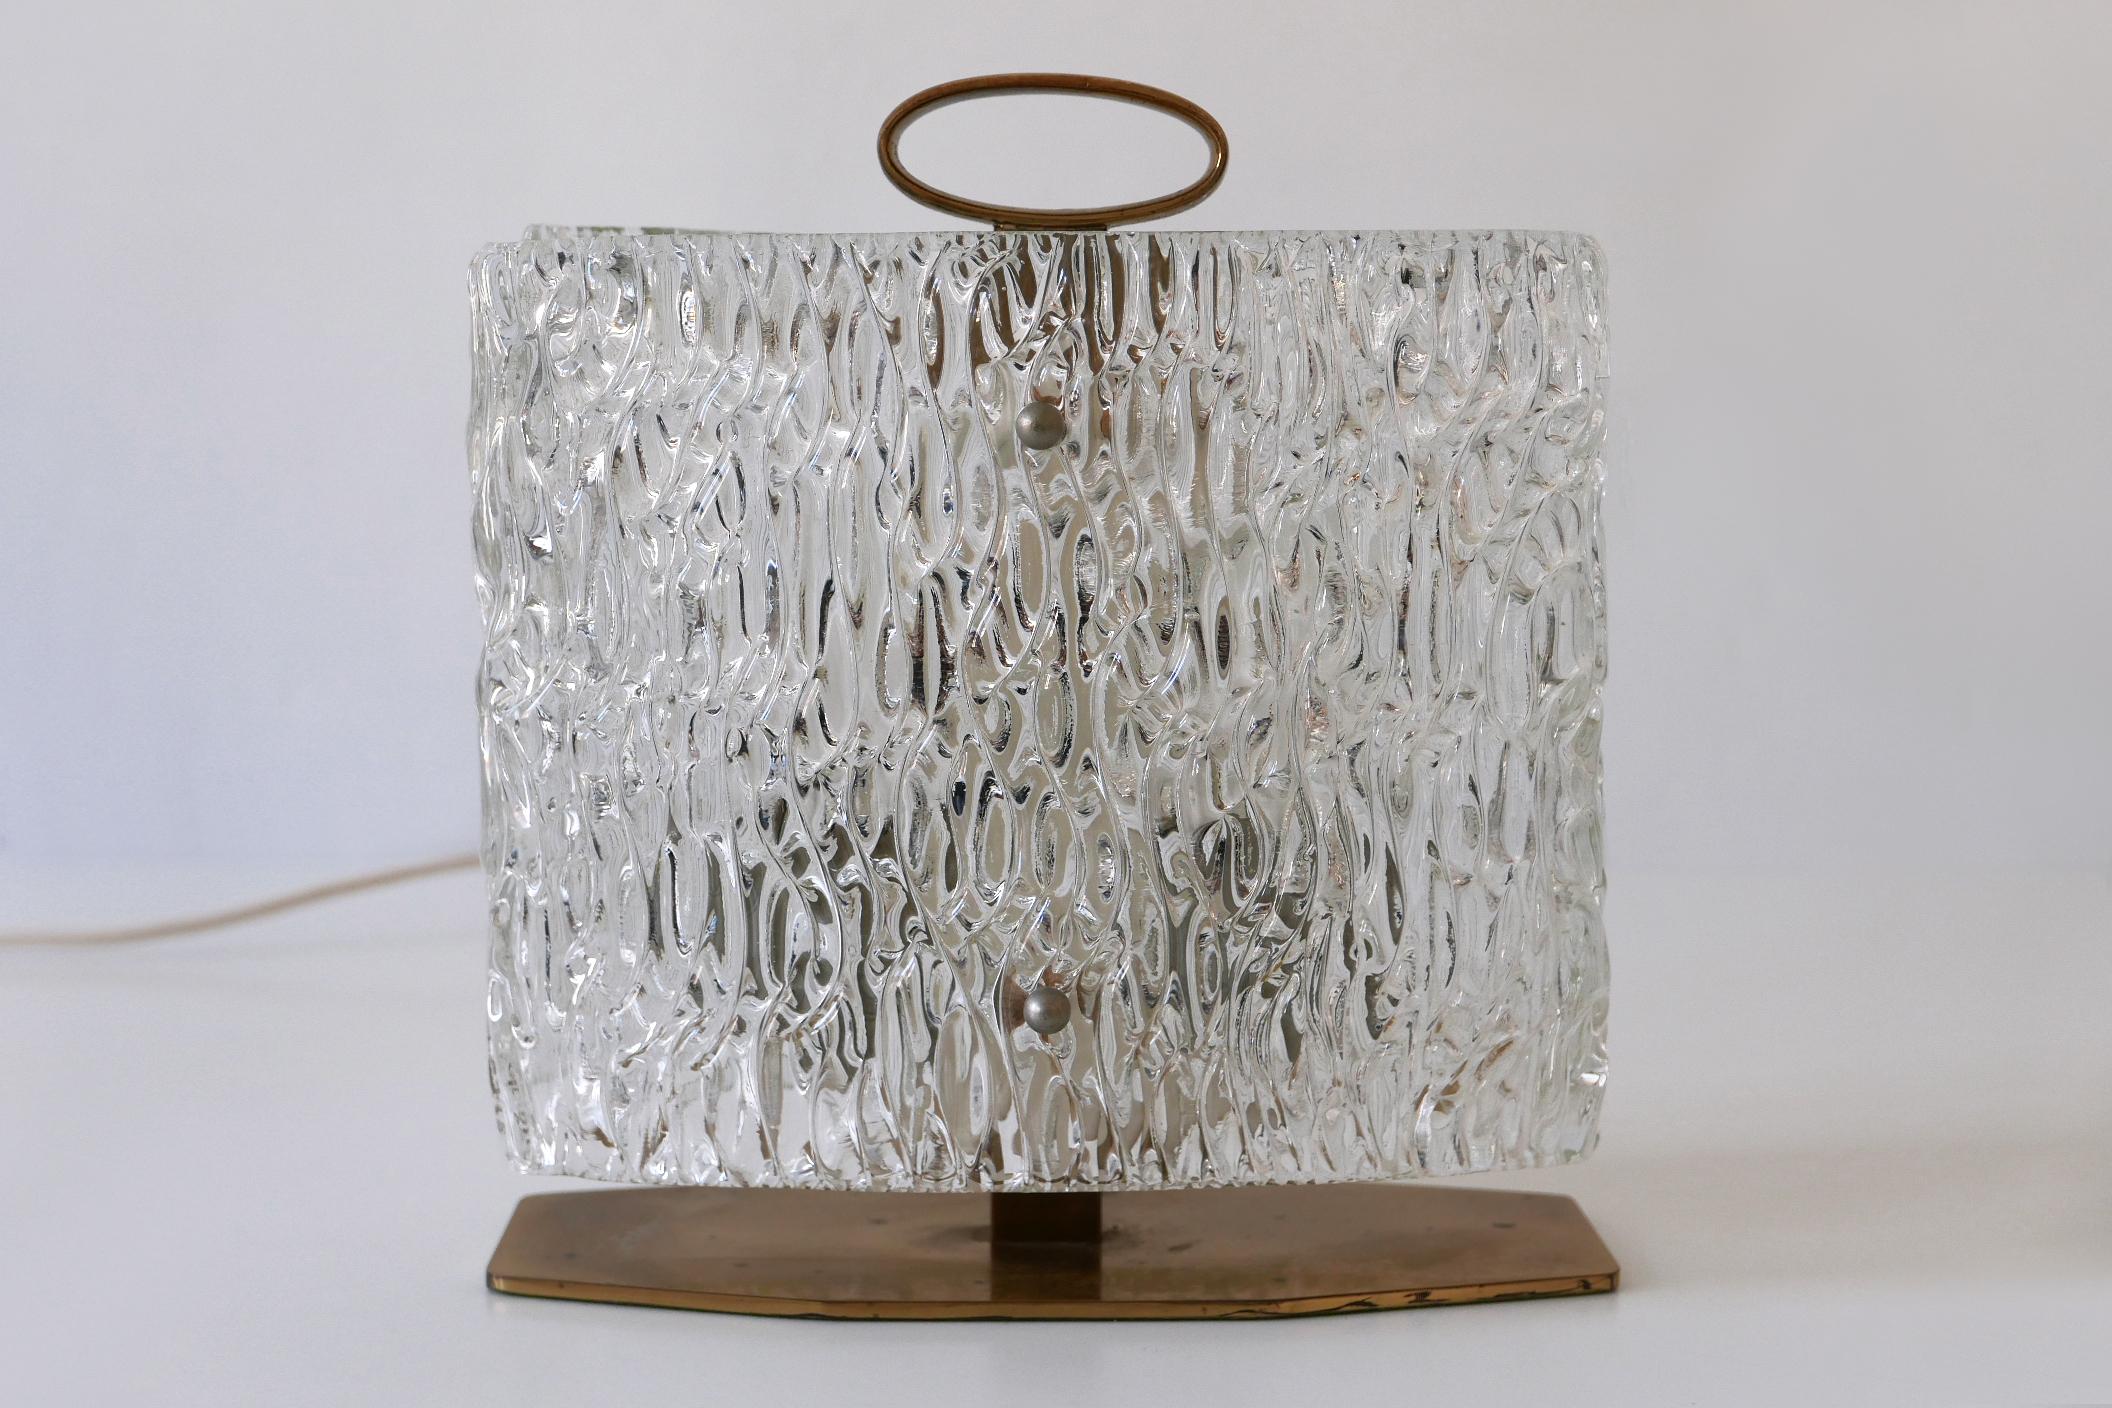 Exceptional Mid-Century Modern Table Lamp with Ice Glass Shade, 1950s, Italy For Sale 4